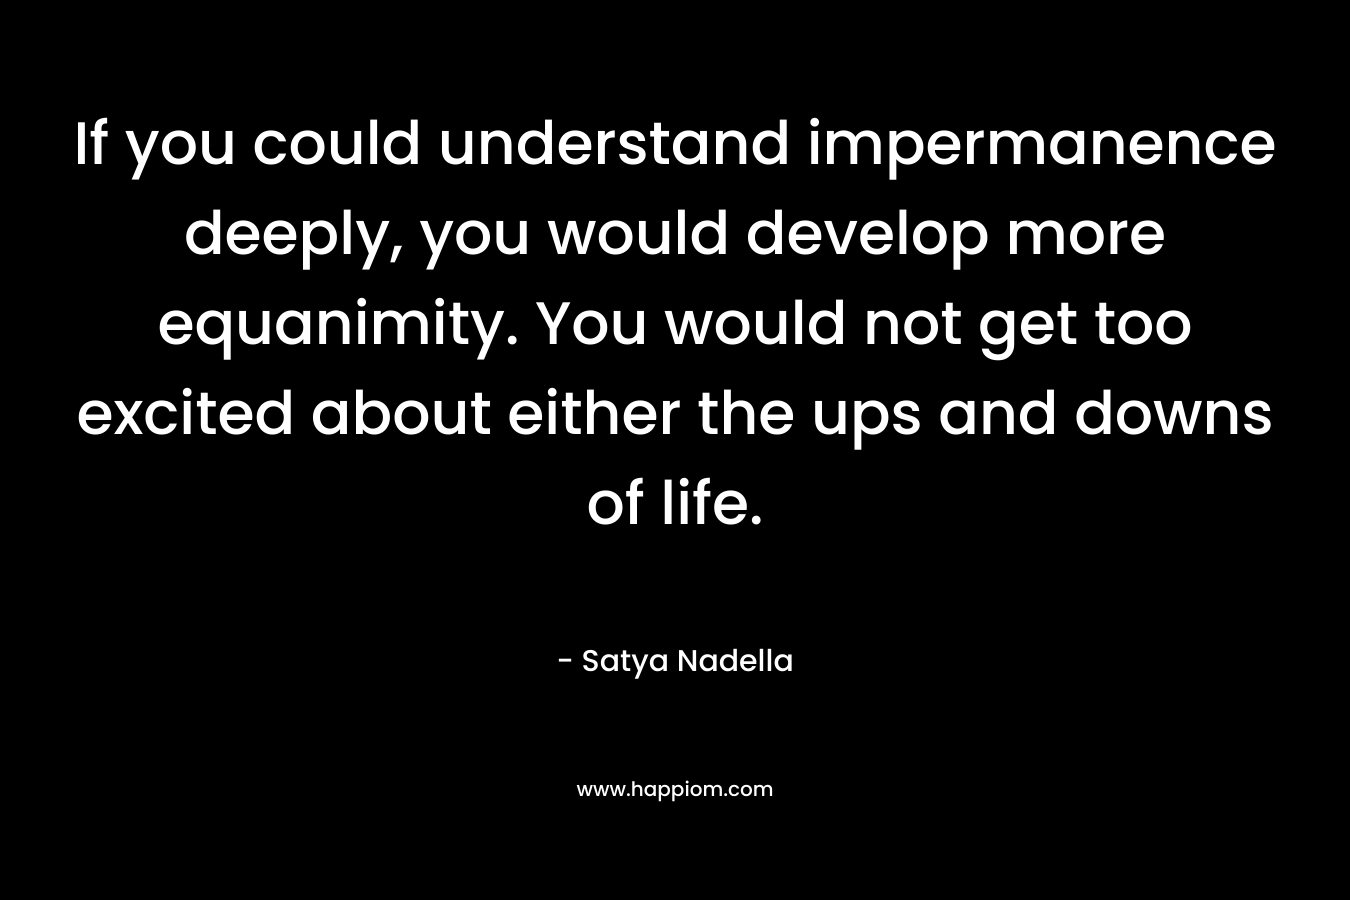 If you could understand impermanence deeply, you would develop more equanimity. You would not get too excited about either the ups and downs of life. – Satya Nadella